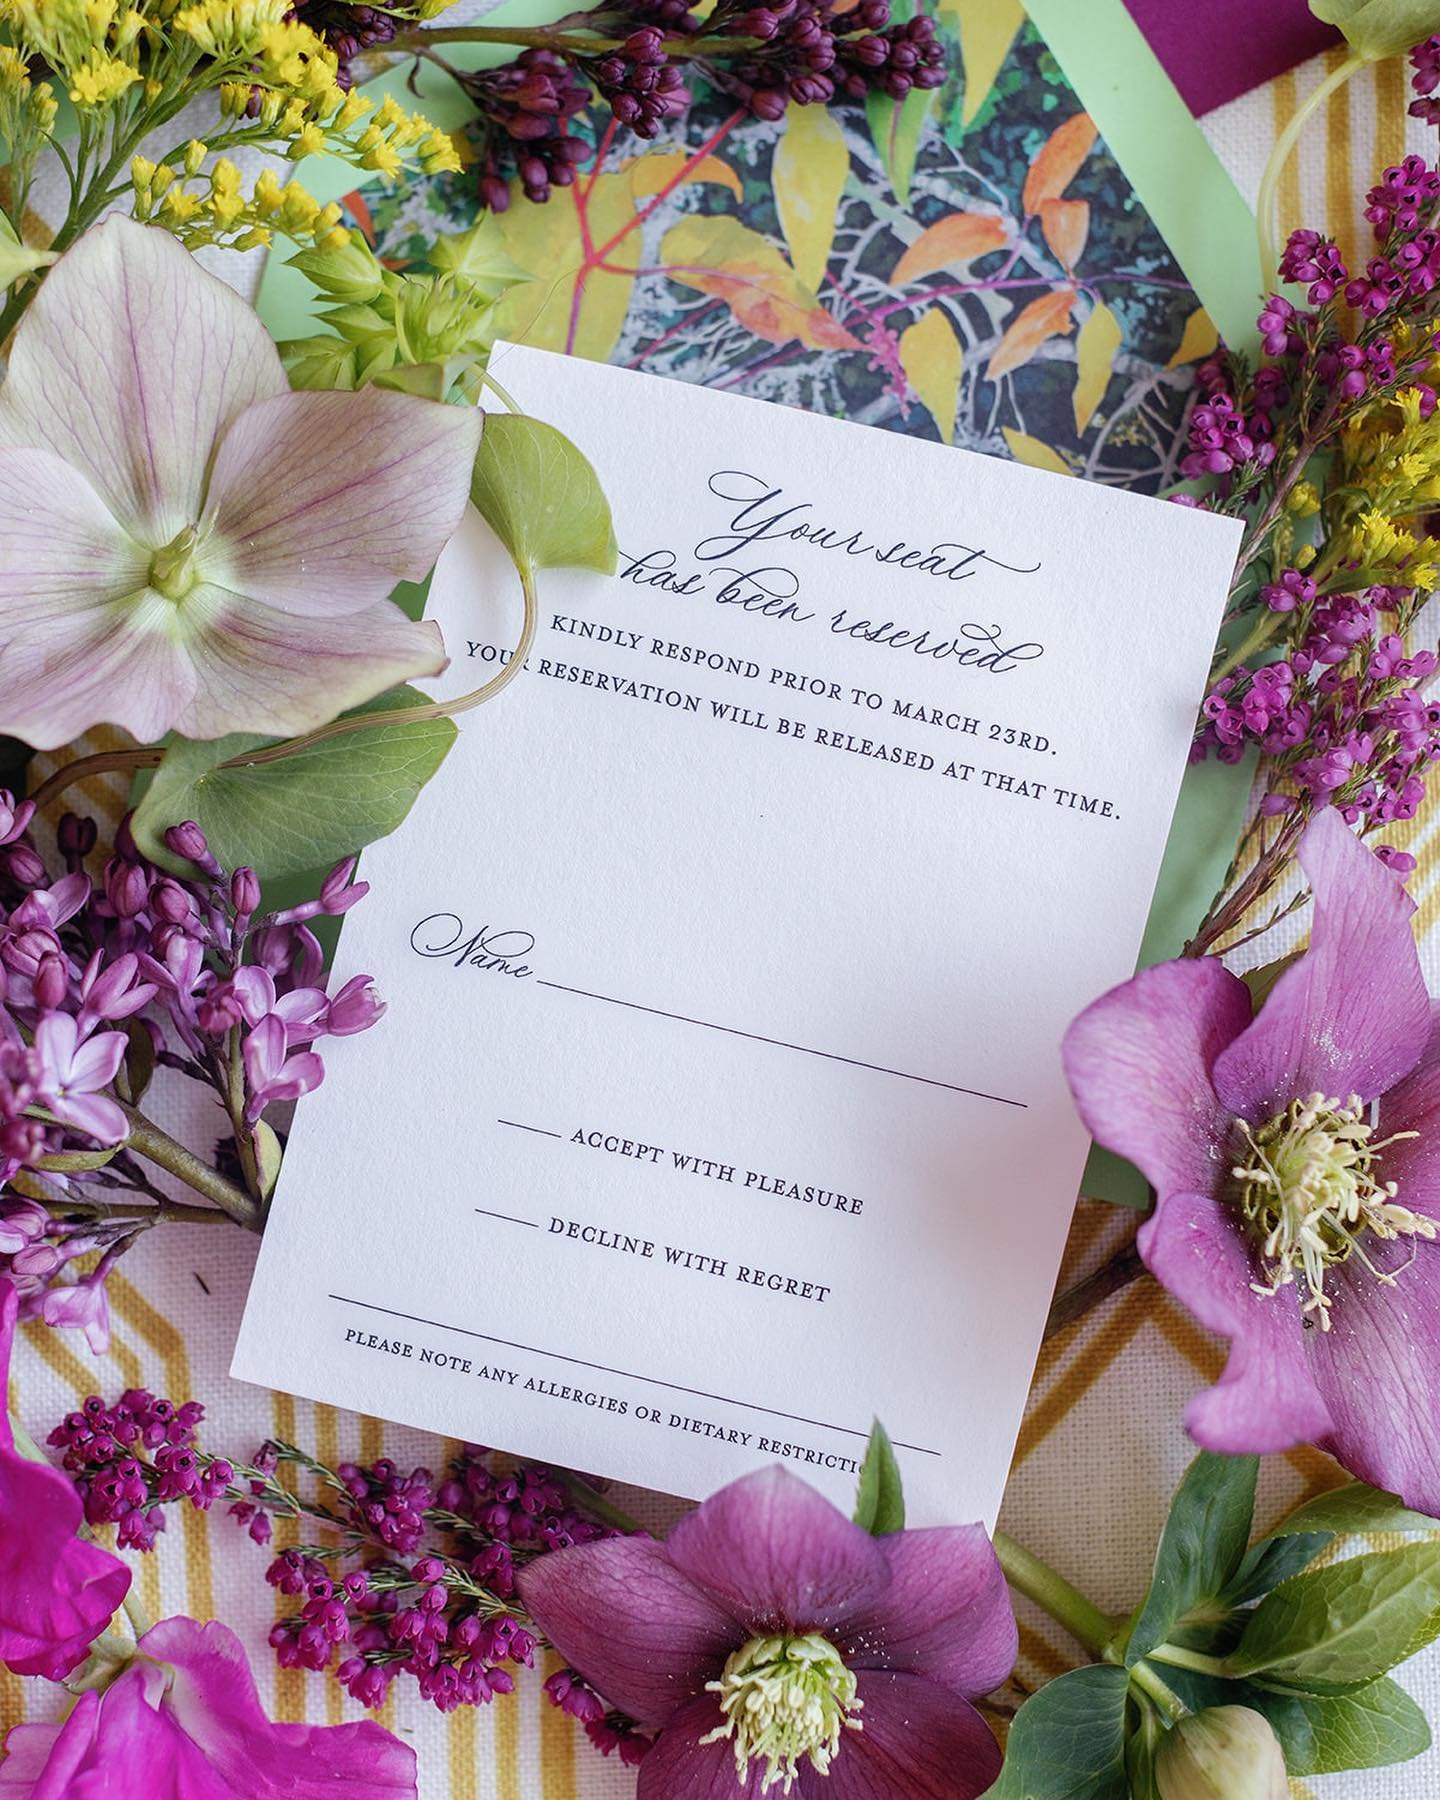 Florals to accent every stationery and gifting detail, one petal at a time. We utilized blooms with vibrant hues of saffron and fuschia to compliment the design of Kristin Chenoweth&rsquo;s &ldquo;I&rsquo;m No Philosopher, But I Got Thoughts&rdquo; b